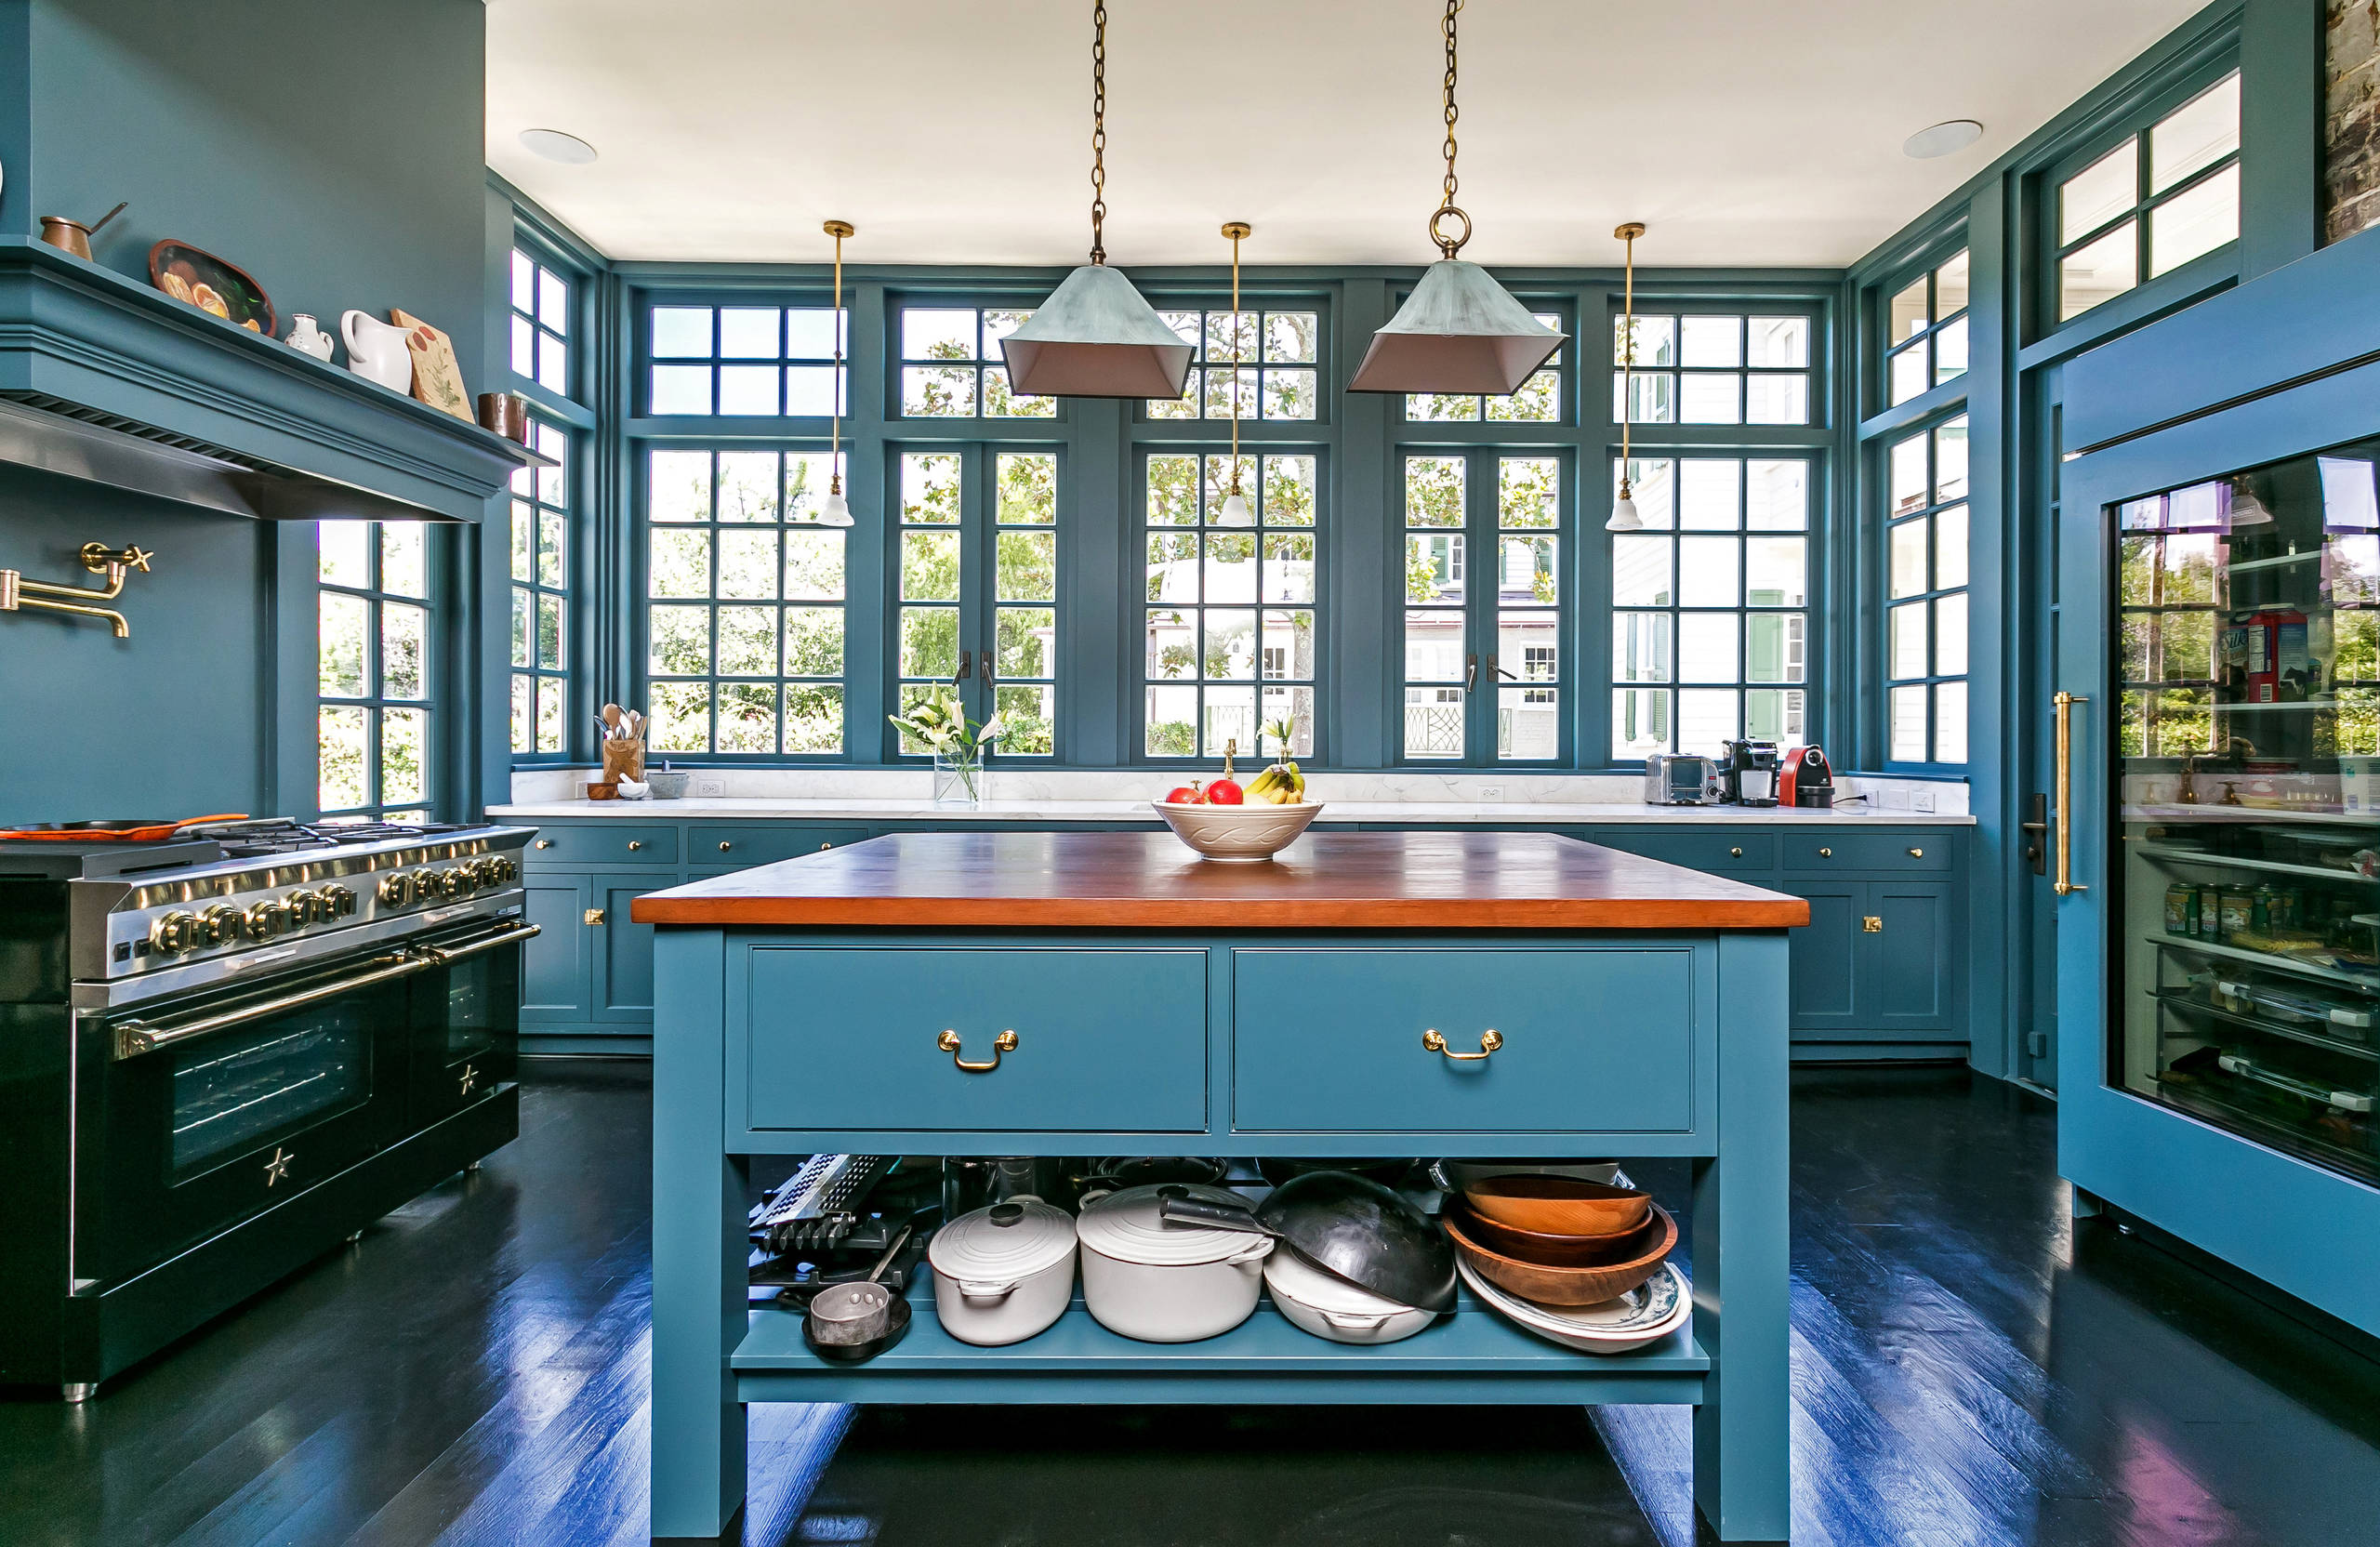 Sage green kitchen with shaker cabinets in a renovated 1880s house,  Minneapolis, Minnesota [2500x1667] : r/RoomPorn